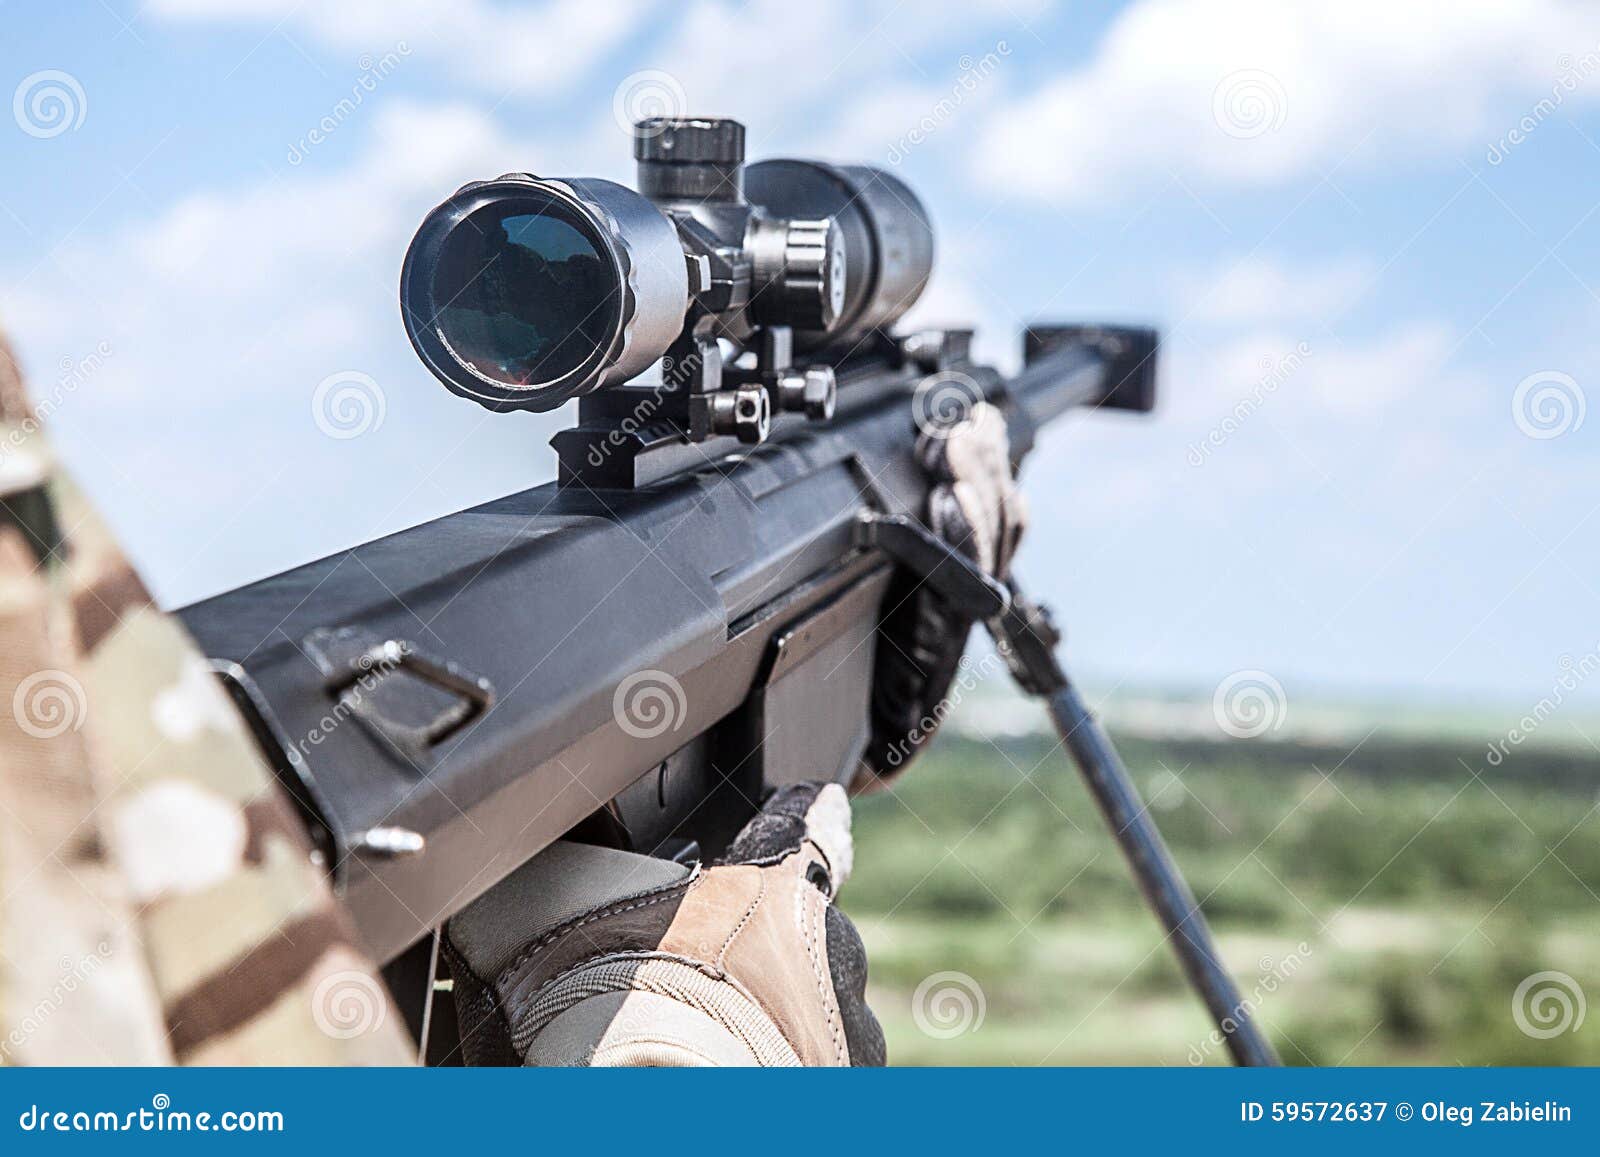 Army ranger sniper stock image. Image of armed, commando ...